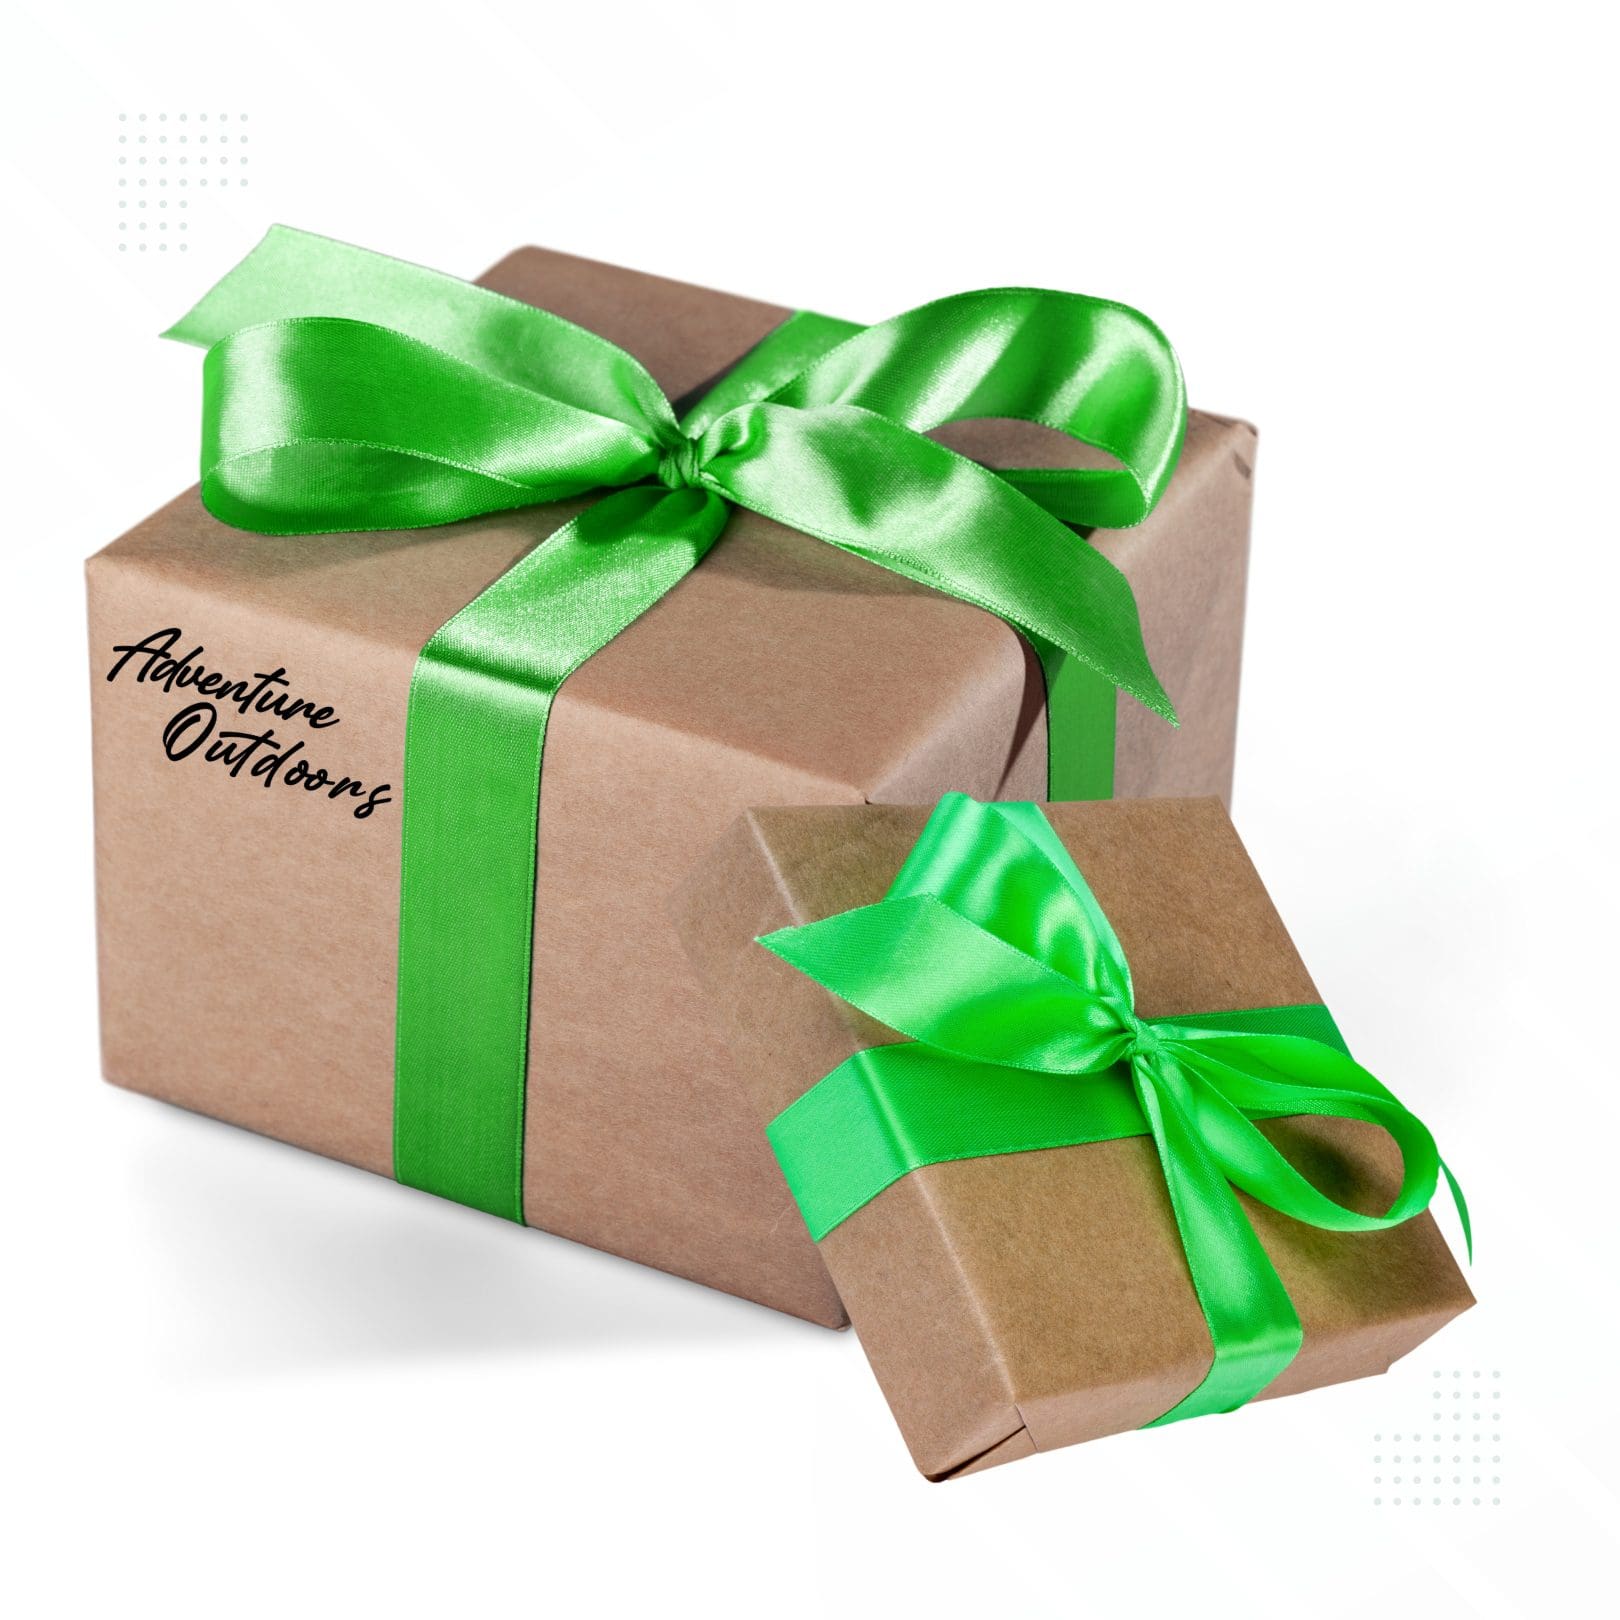 Outdoor gift box